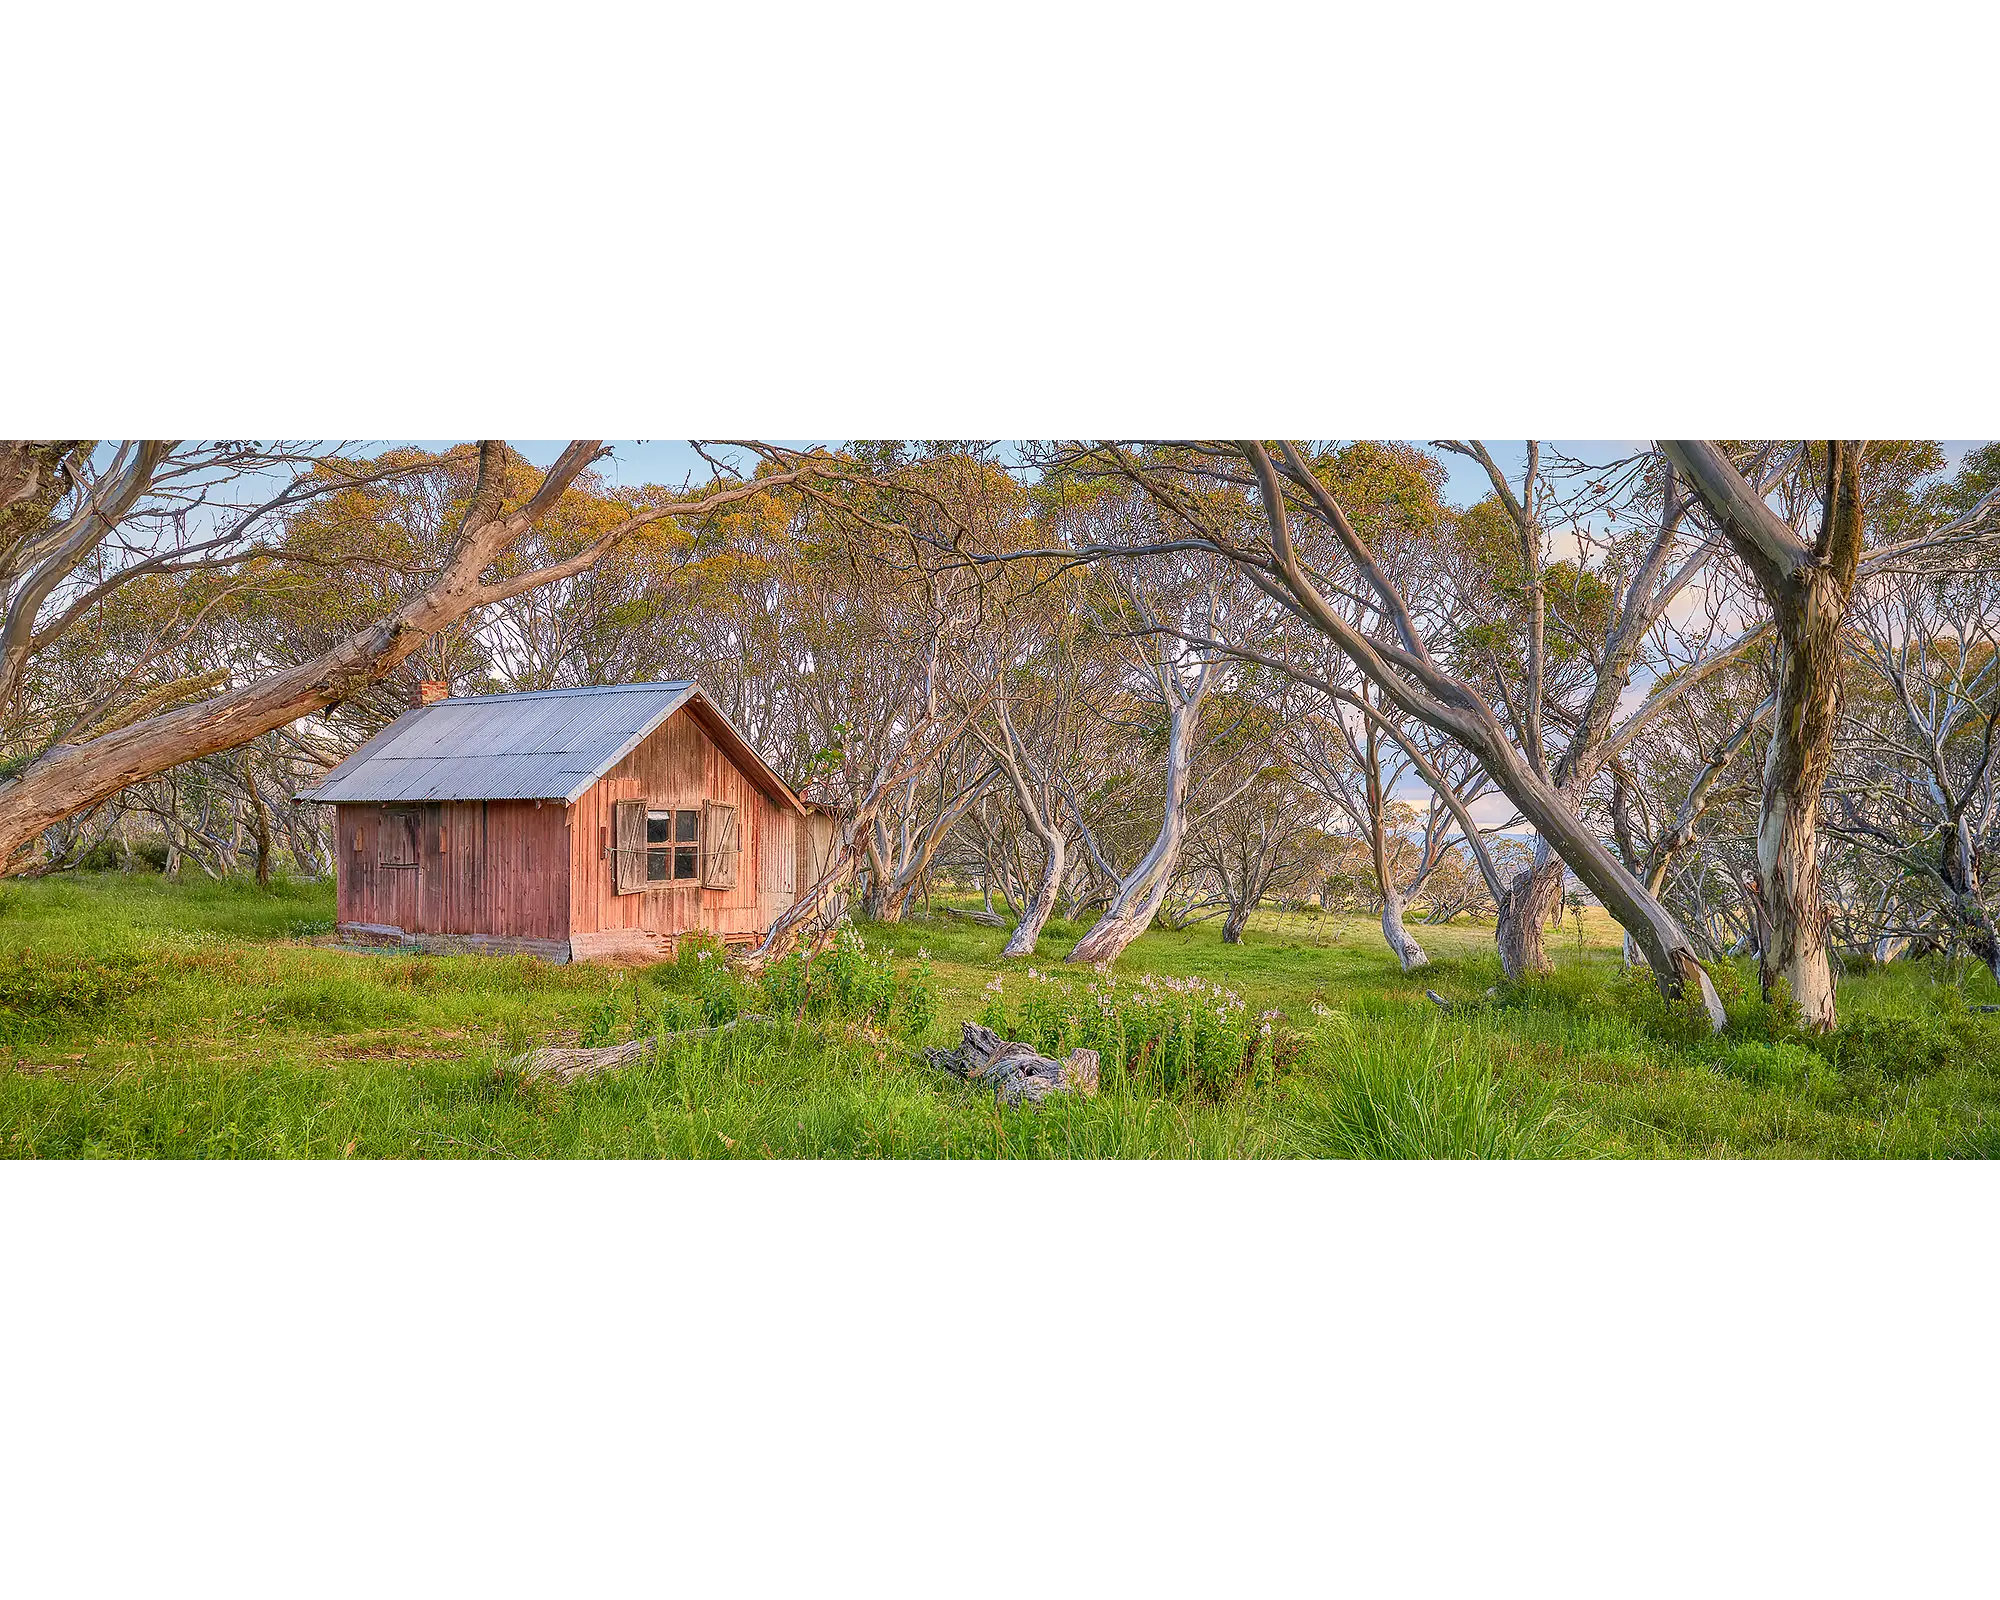 JB Hut at surrounded by snow gums at Dinner Plain, Alpine National Park.